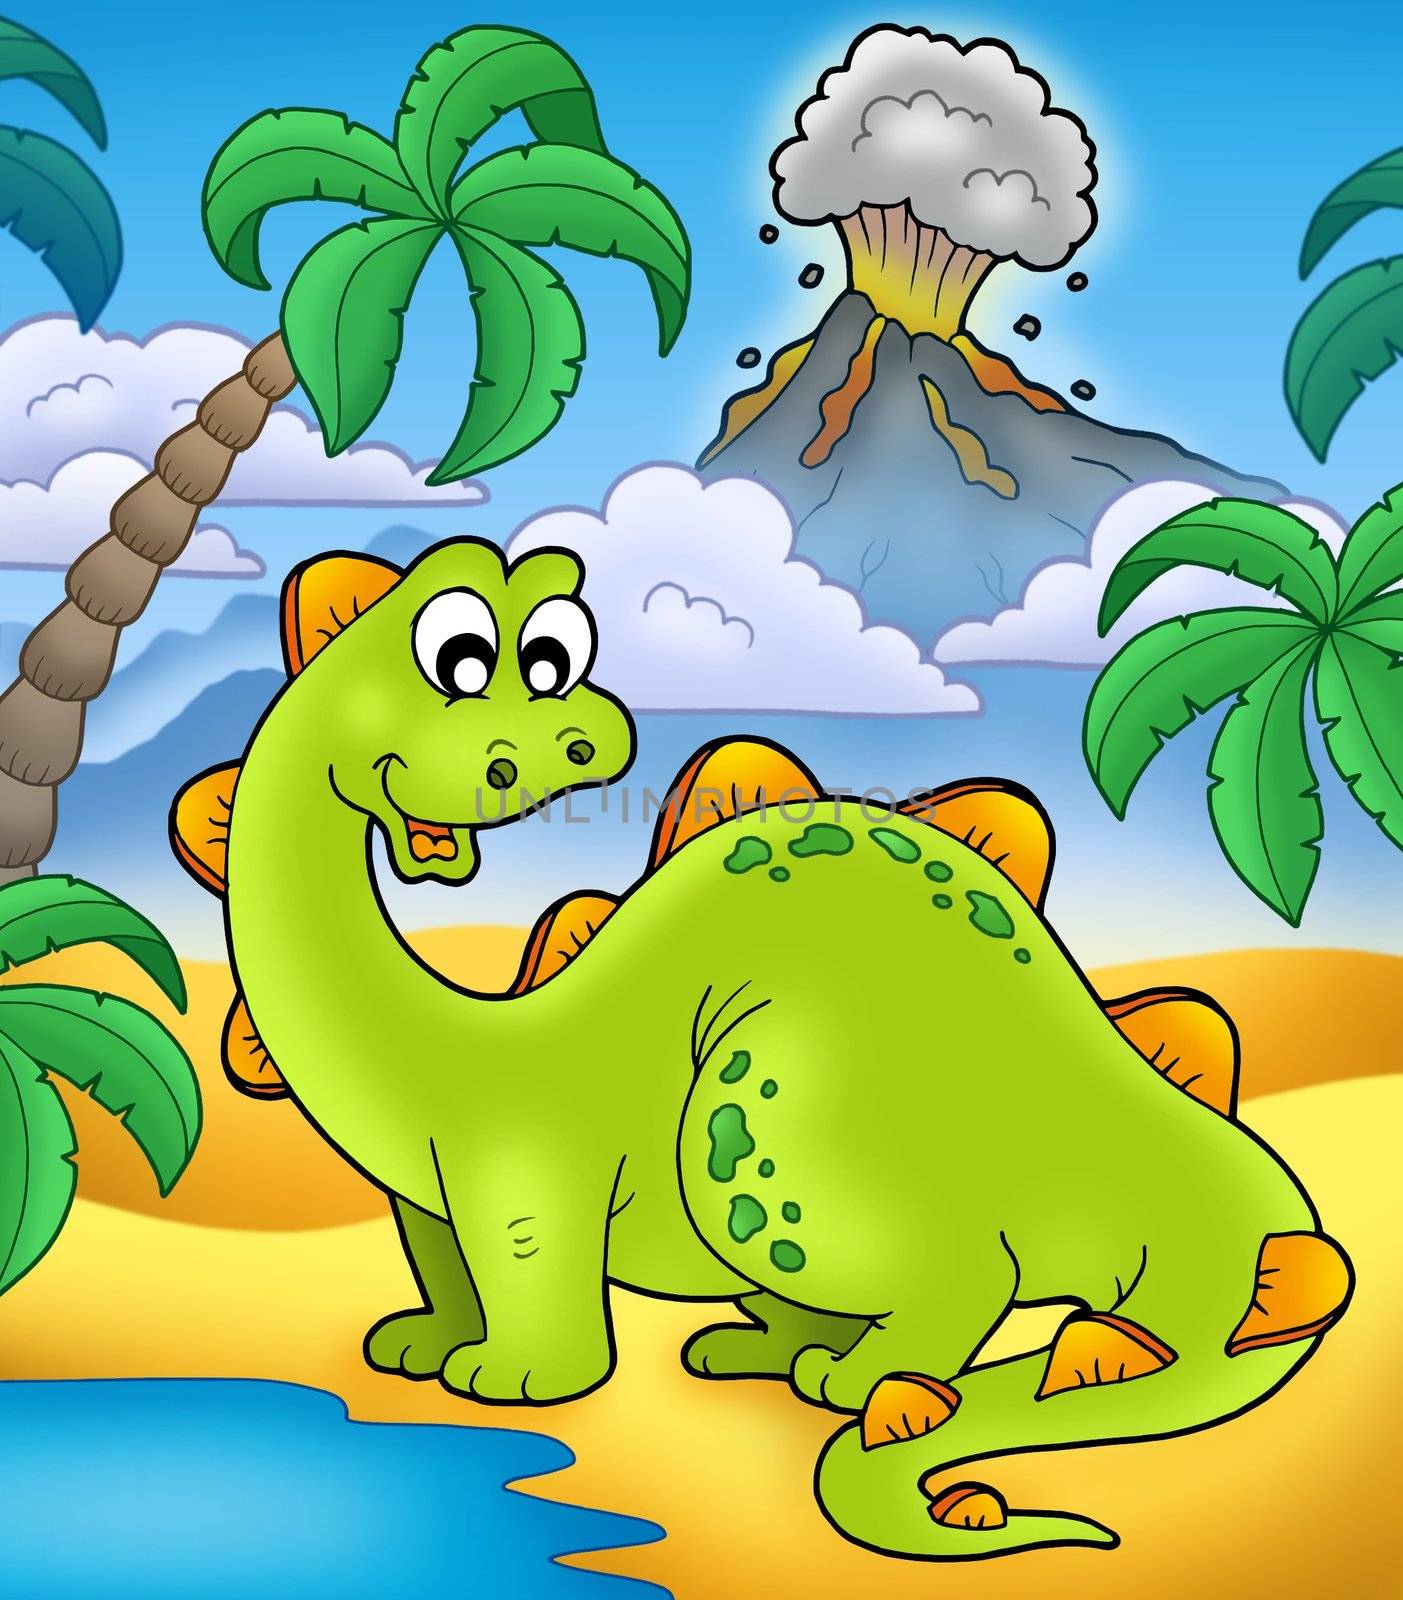 Cute dinosaur with volcano - color illustration.